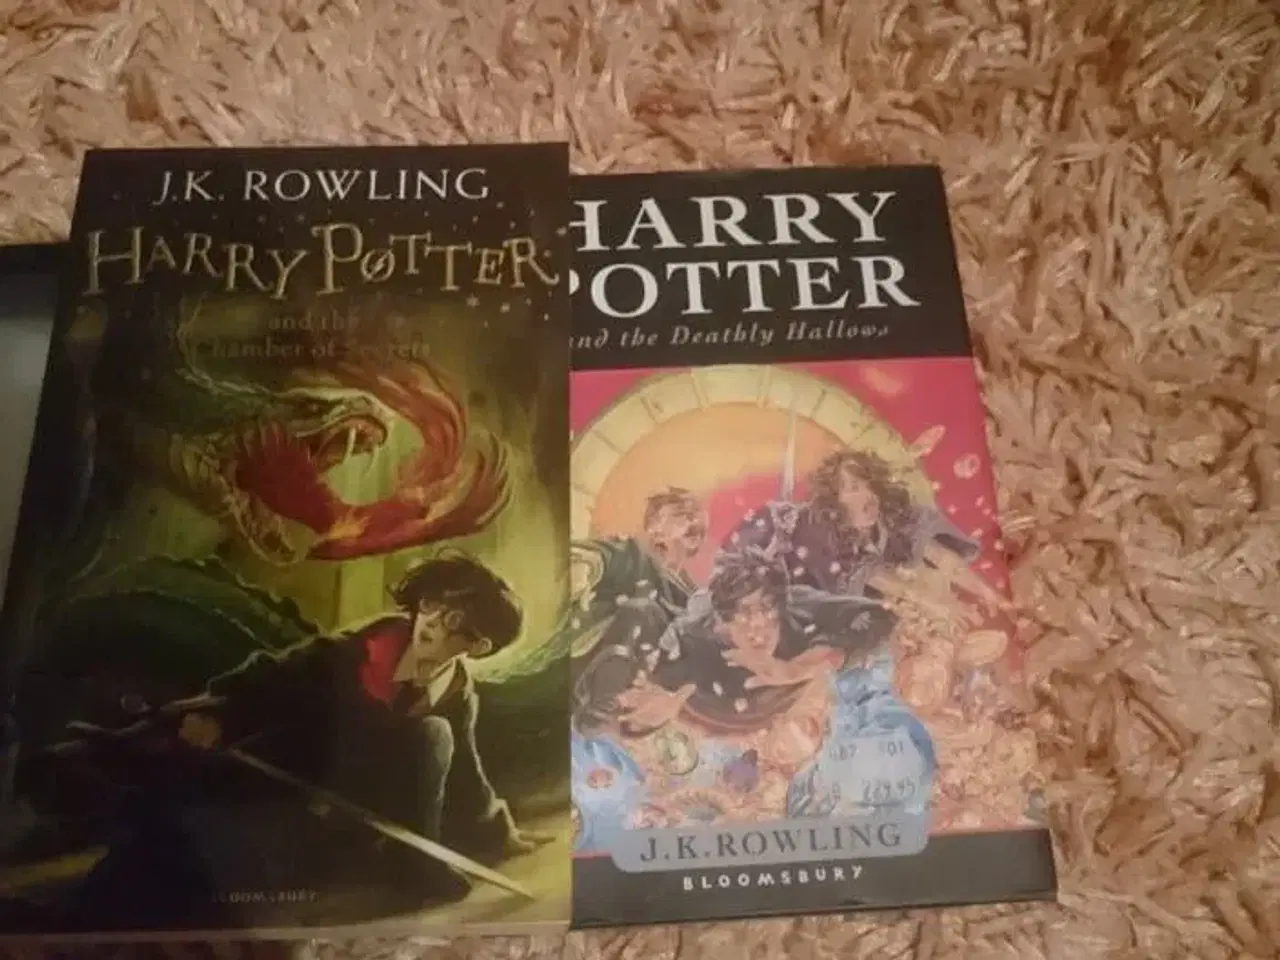 Billede 1 - Harry Potter and the Deathly Hallows